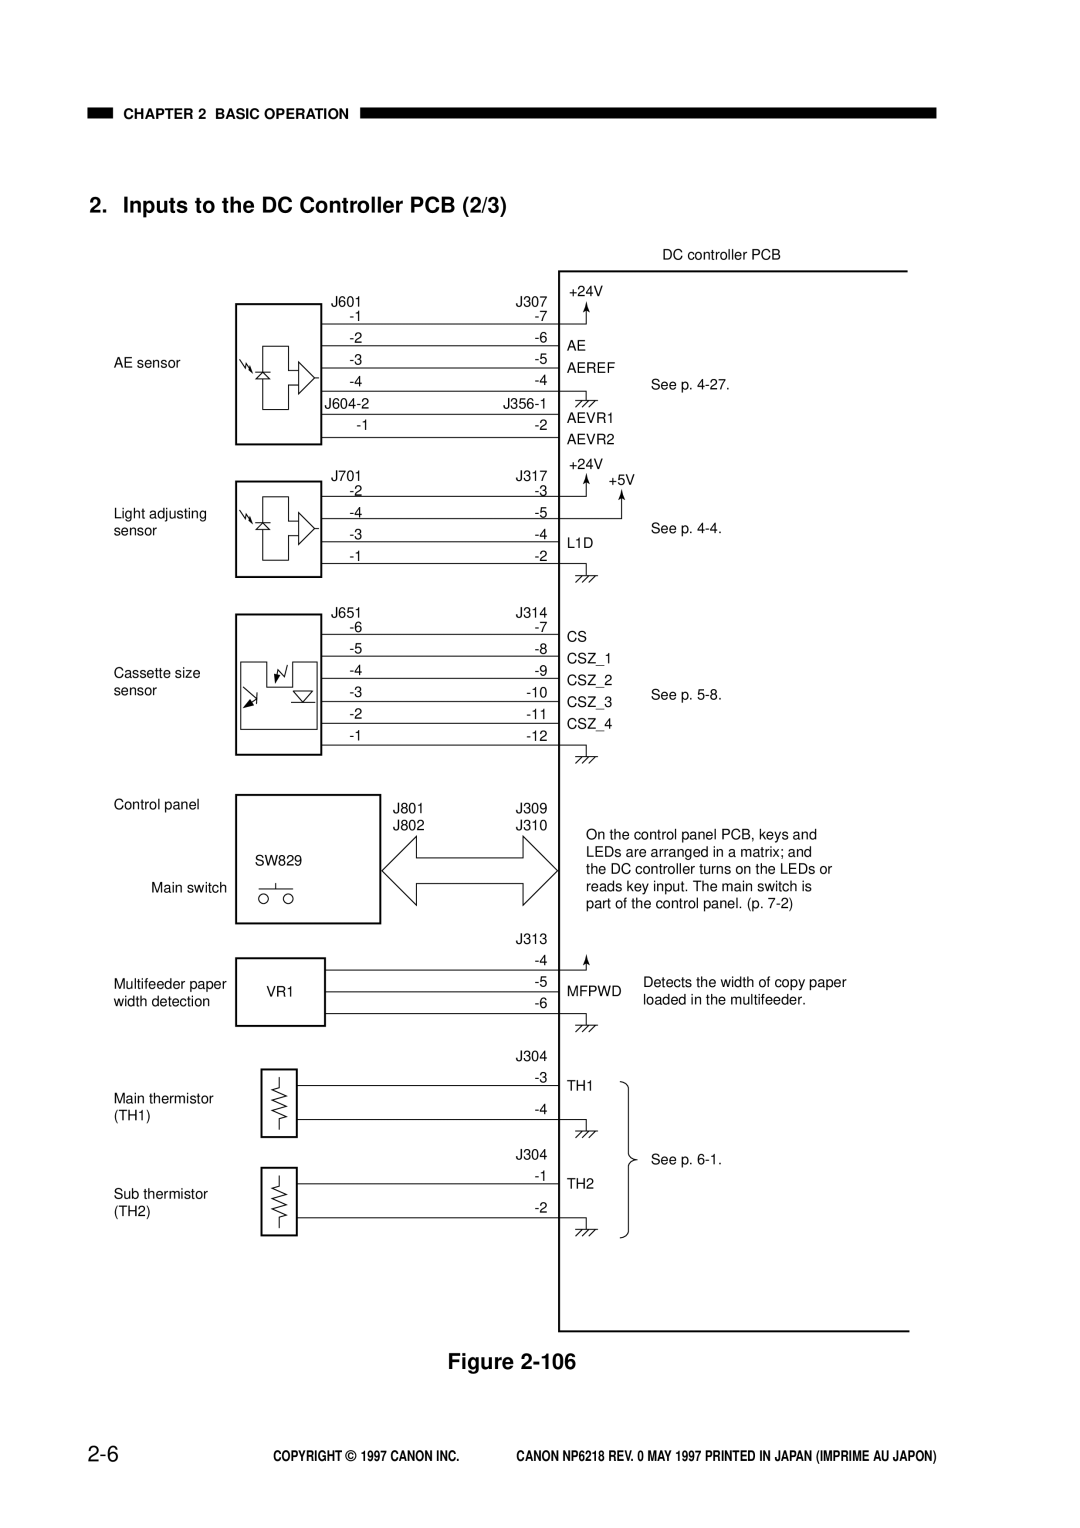 Canon NP6218, FY8-13EX-000 service manual Inputs to the DC Controller PCB 2/3, Basic Operation, COPYRIGHT 1997 CANON INC 